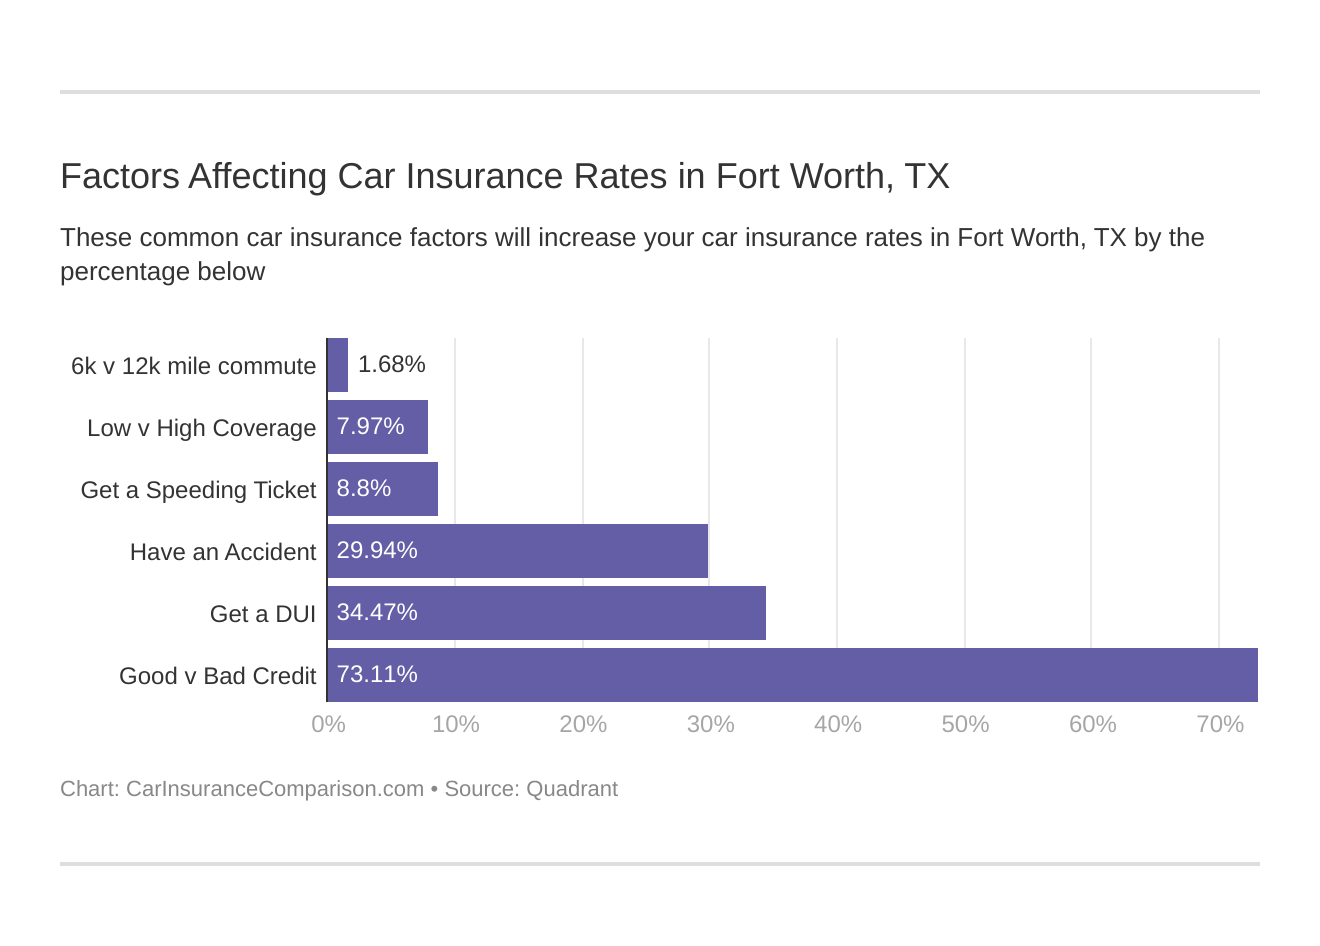 Factors Affecting Car Insurance Rates in Fort Worth, TX